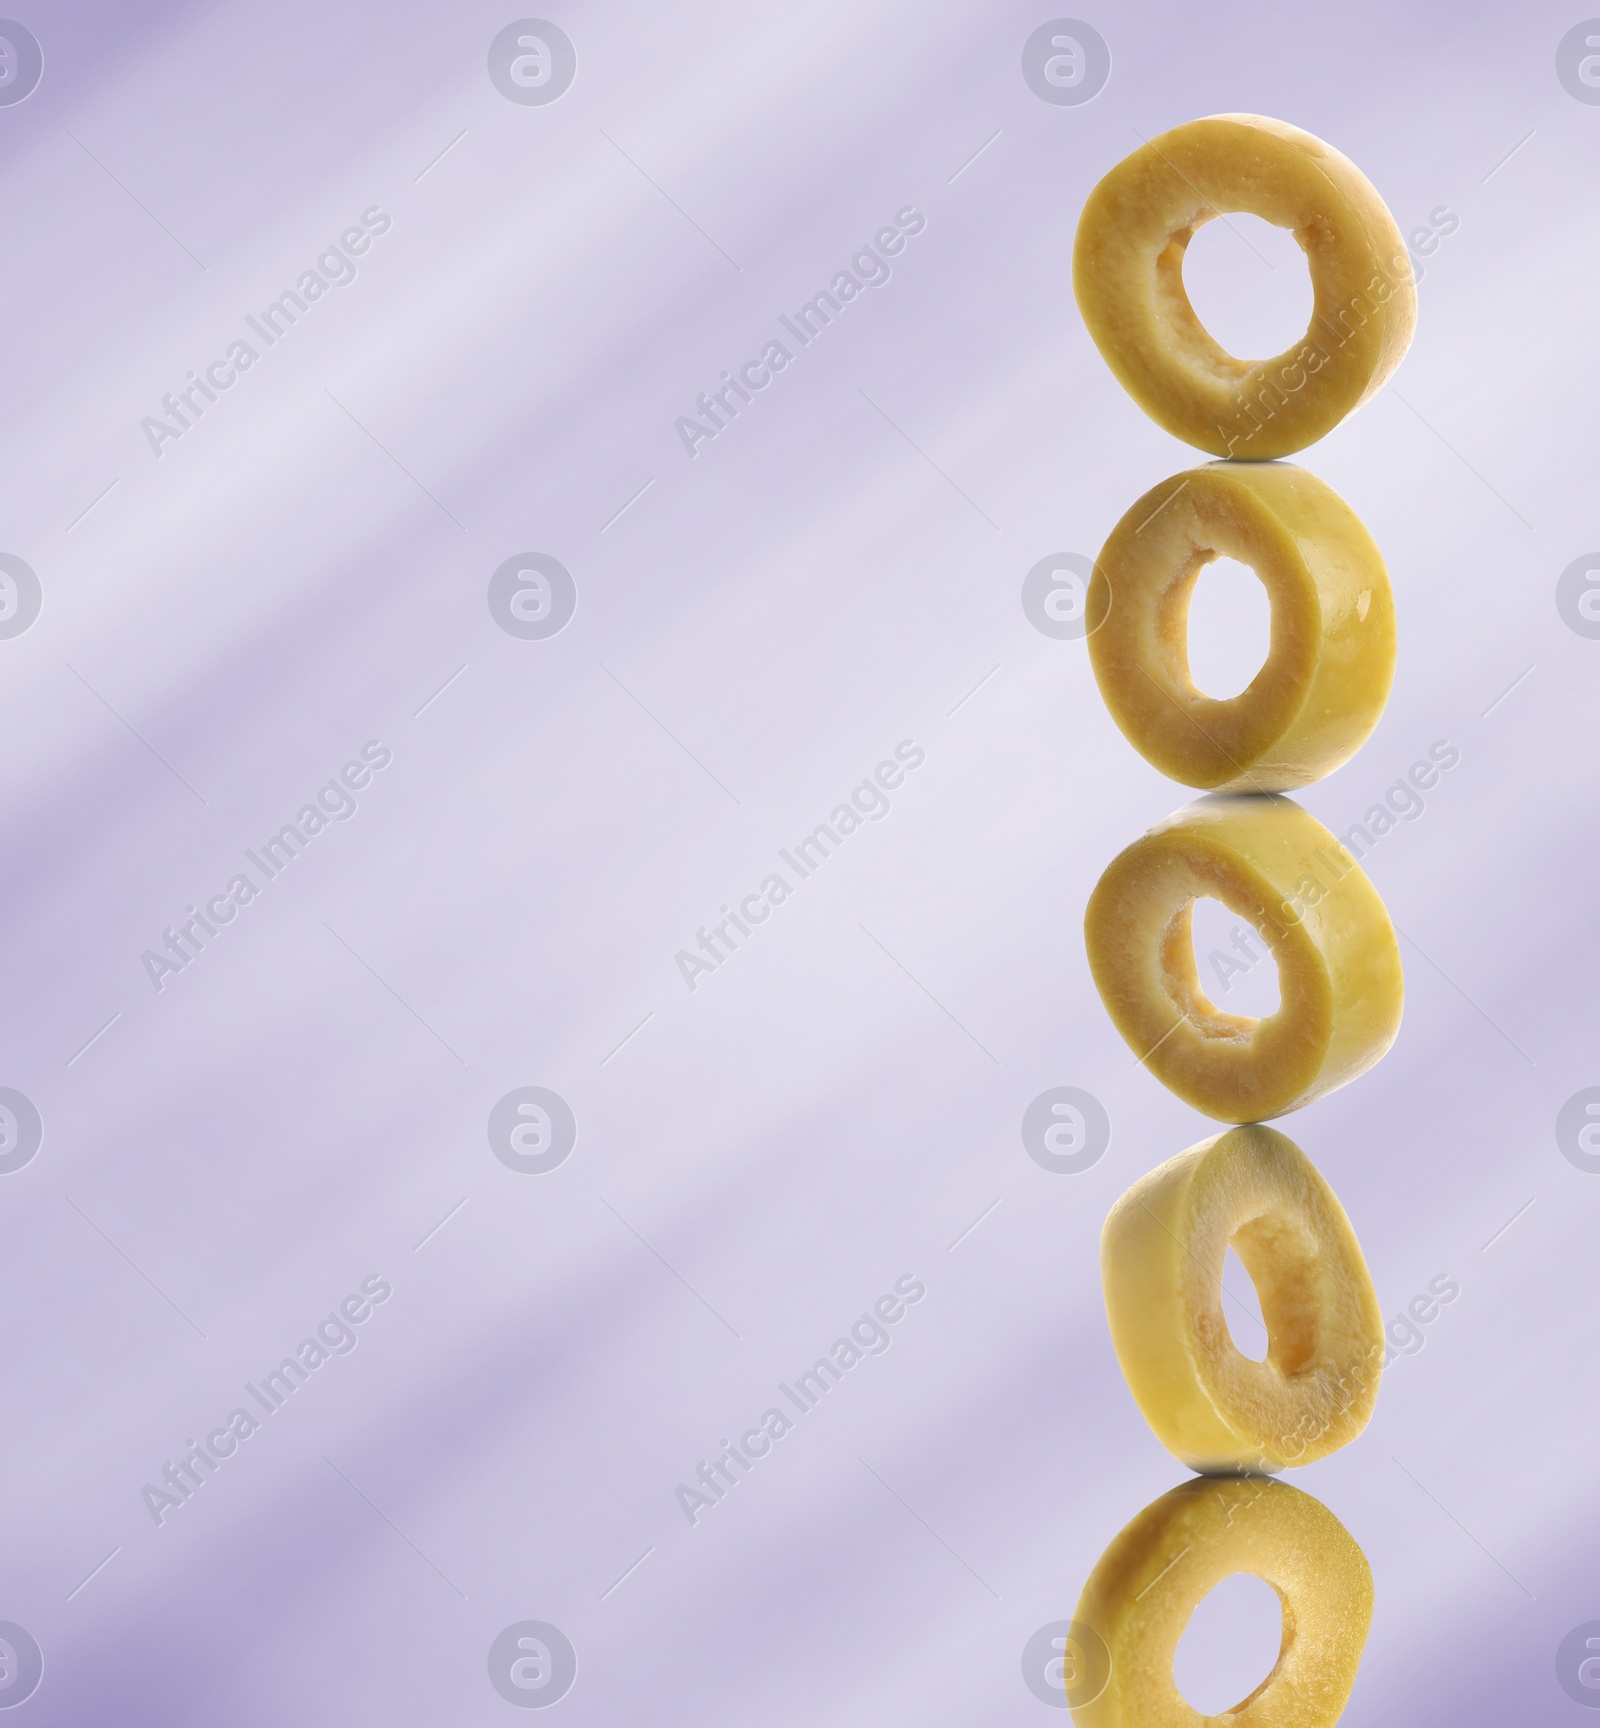 Image of Stacked slices of green olive on light purple gradient background, space for text